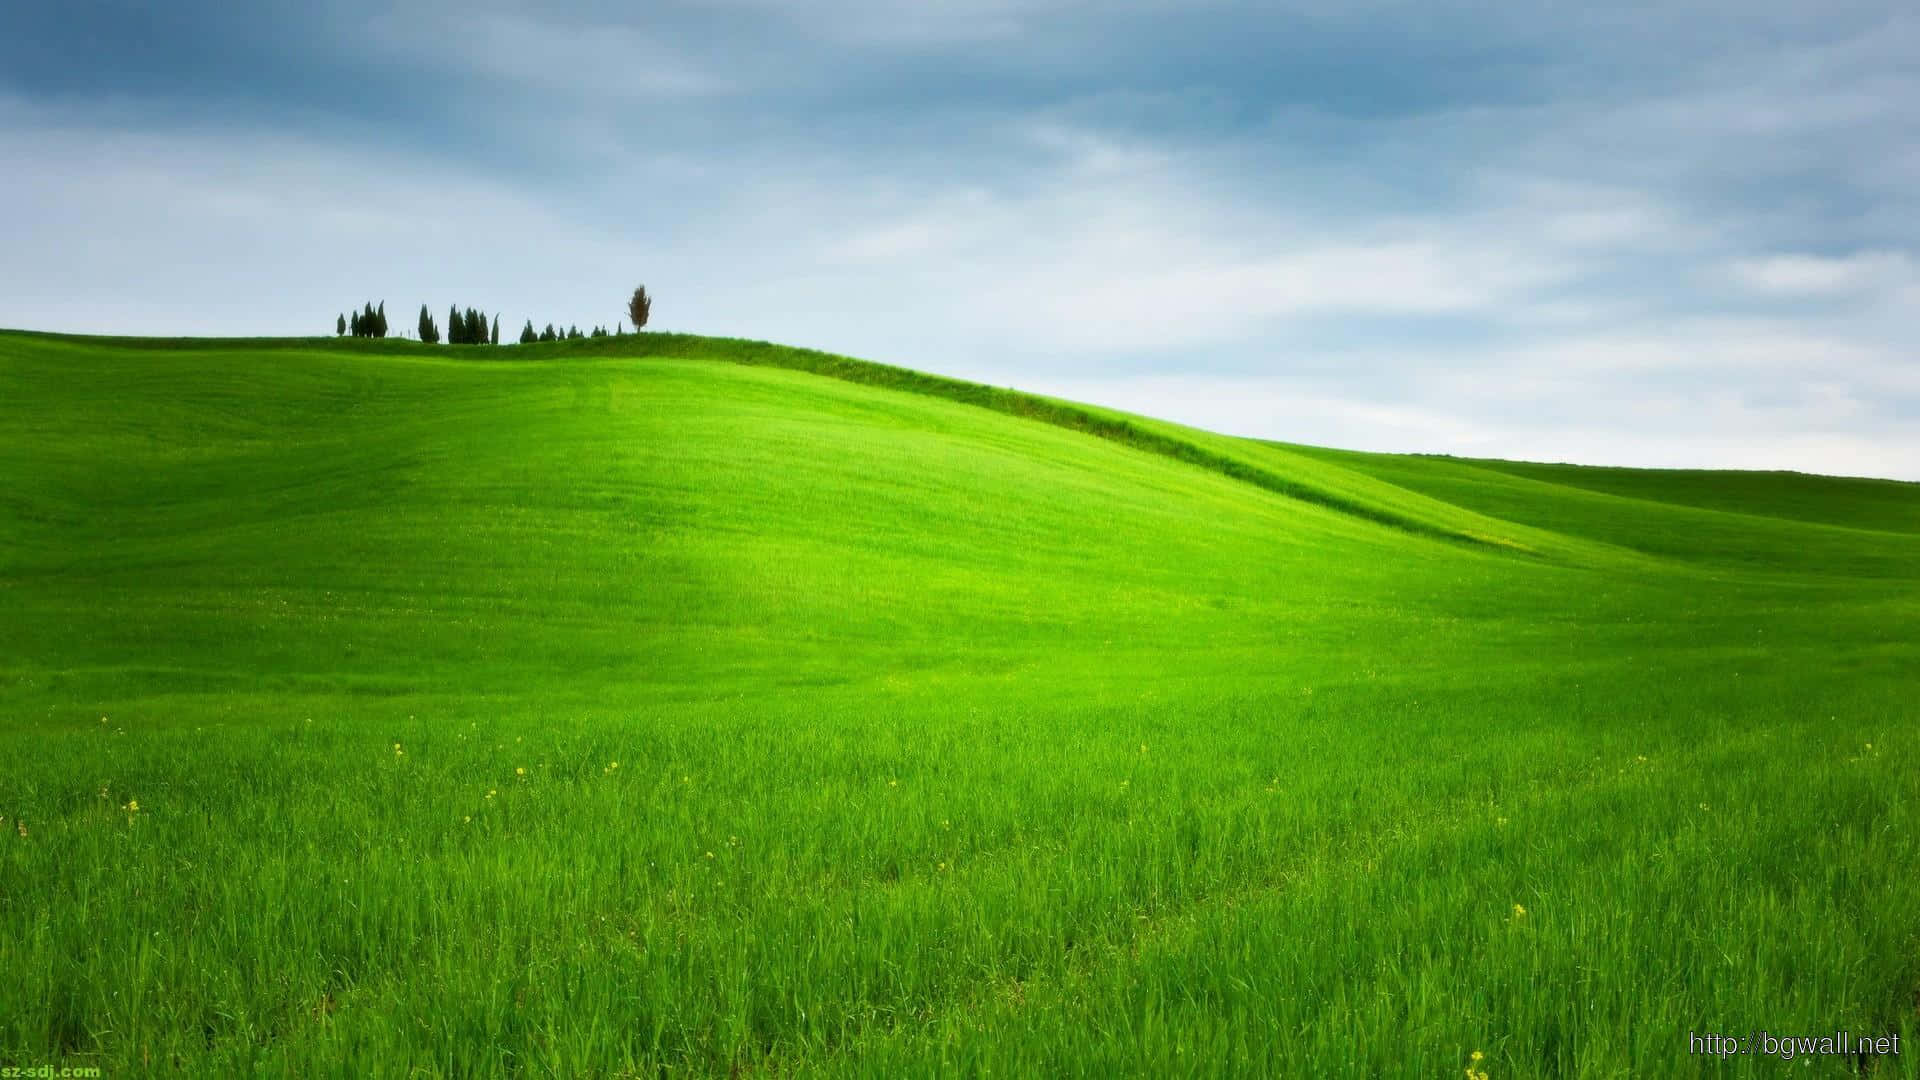 Windows Hill – Landscape Of Rolling Hills With Windows